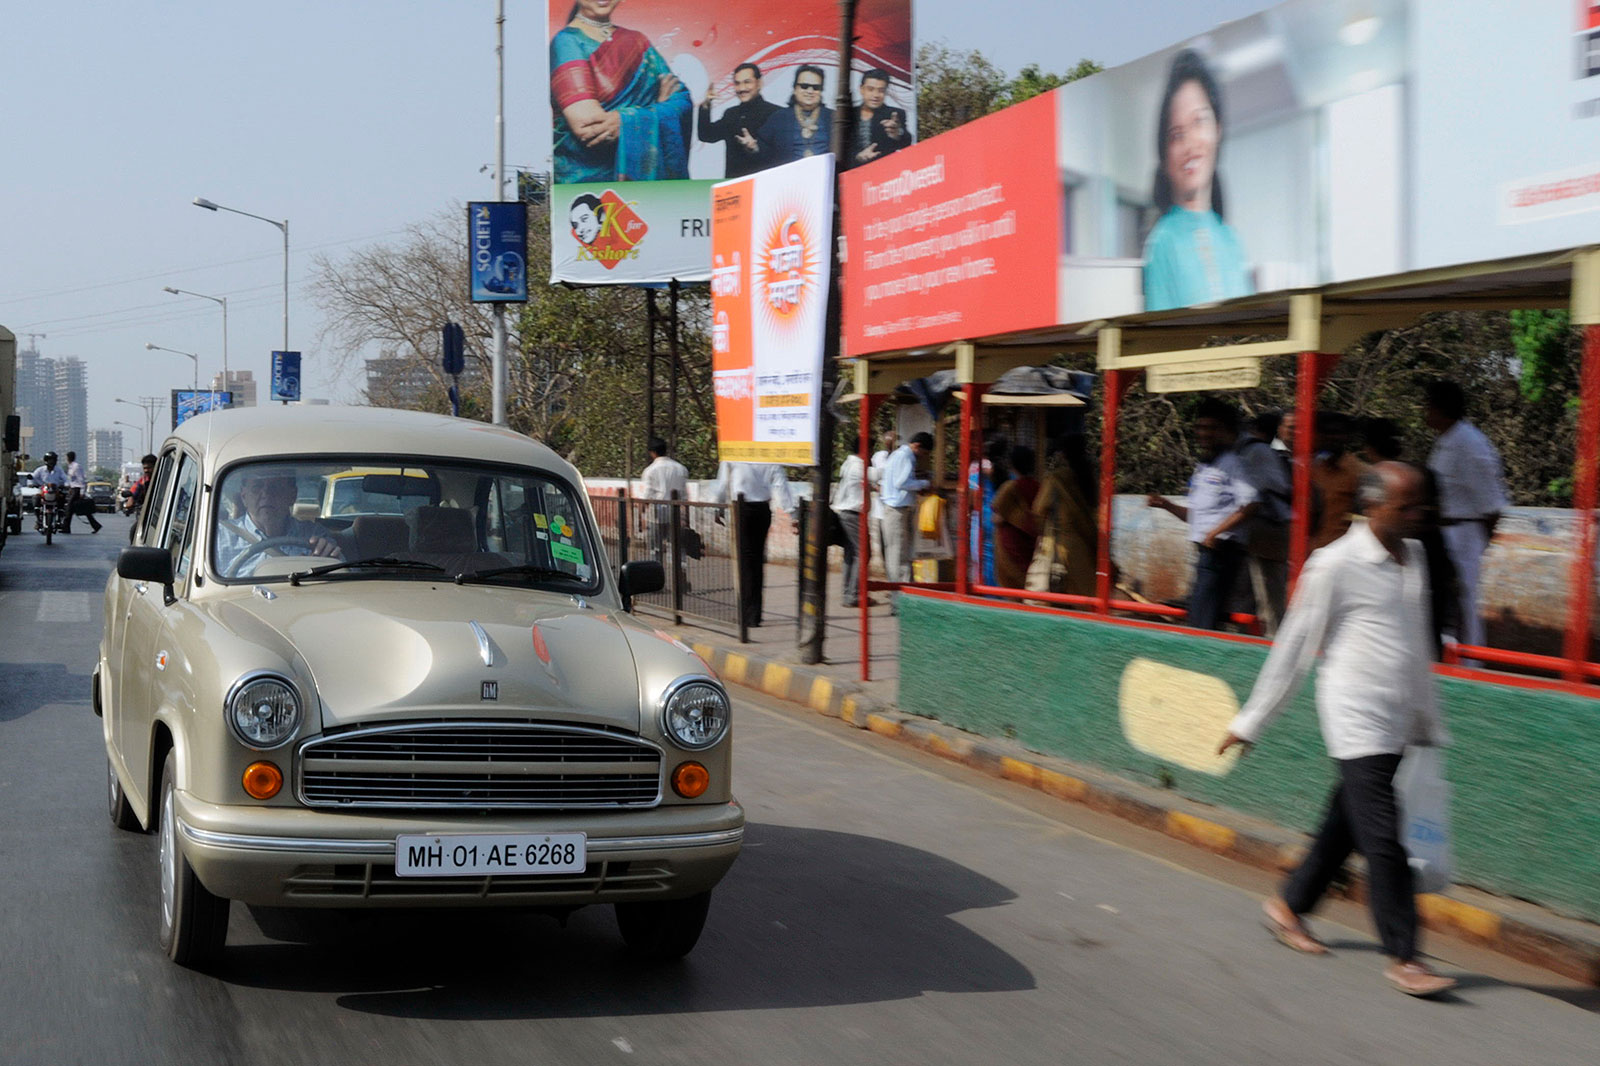 <p>Take one already-dated <strong>British design</strong> and export it to India where there’s a need for cheap, rugged transport and, hey presto, you have the Hindustan Ambassador. Developed from the Morris Oxford Series 3, the Ambassador is still a common sight on India’s roads as a taxi.</p><p>Its simple mechanicals mean it can cope with vast amounts of <strong>abuse and miles</strong>. Some were even re-imported to the UK in the 1990s until emissions and safety legislation put paid to that.</p>